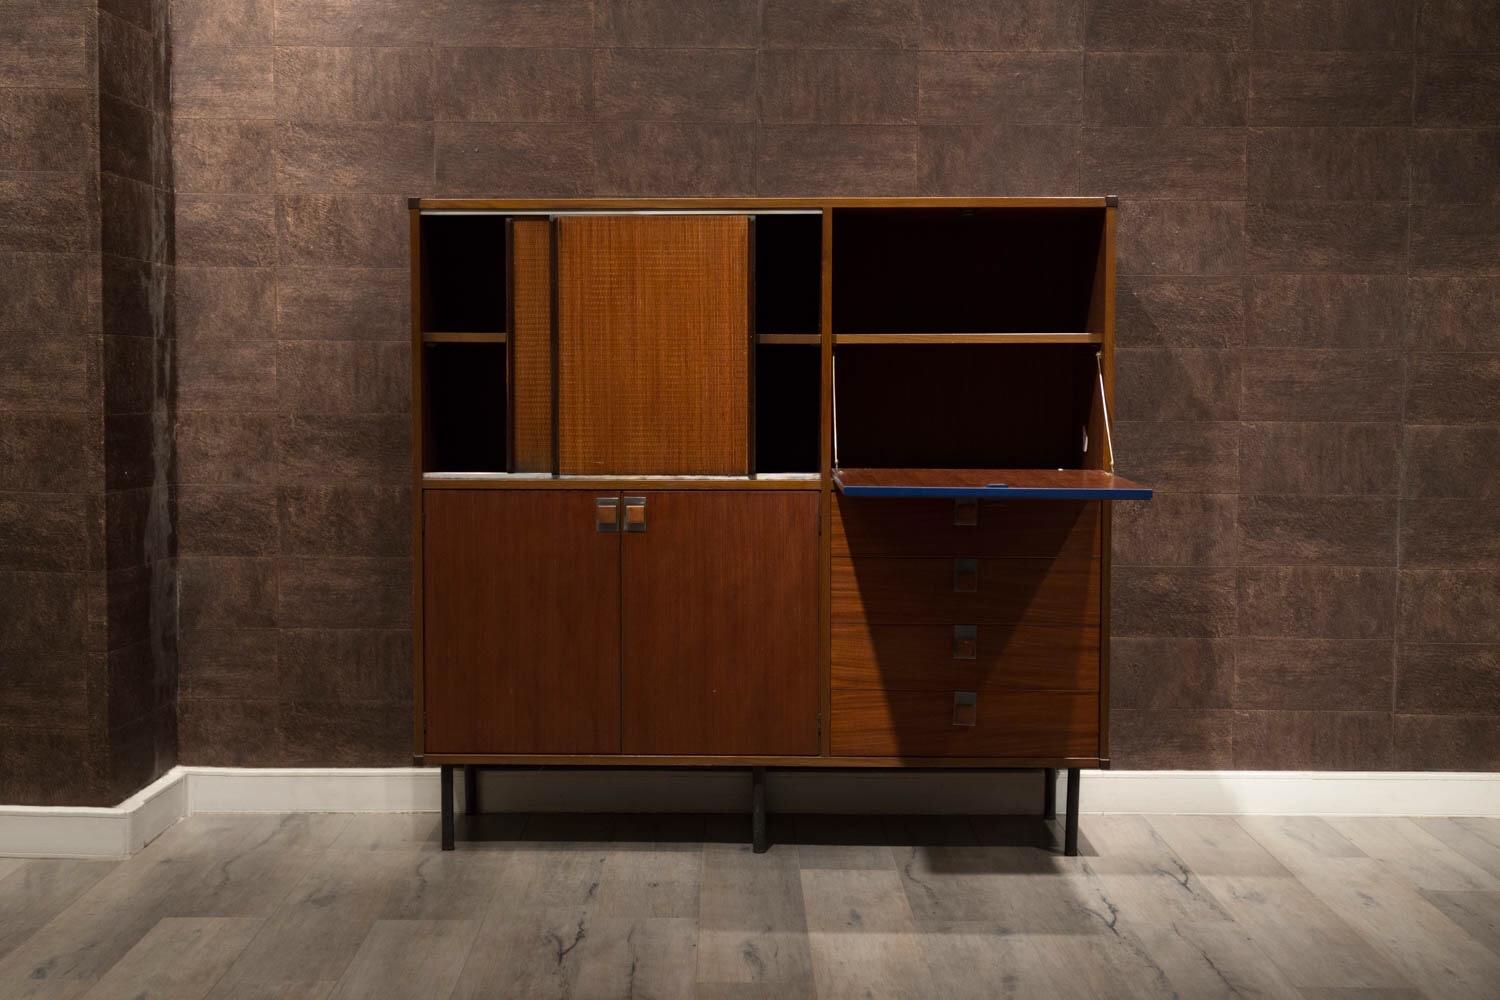 Sideboard/buffet in mahogany wood, Italian-made from the 1950s
On the upper left part, there are two sliding woven rattan doors edged by a dark brown lacquered frame.
Also on the upper part to the right, there is a drop-down flap with a striking